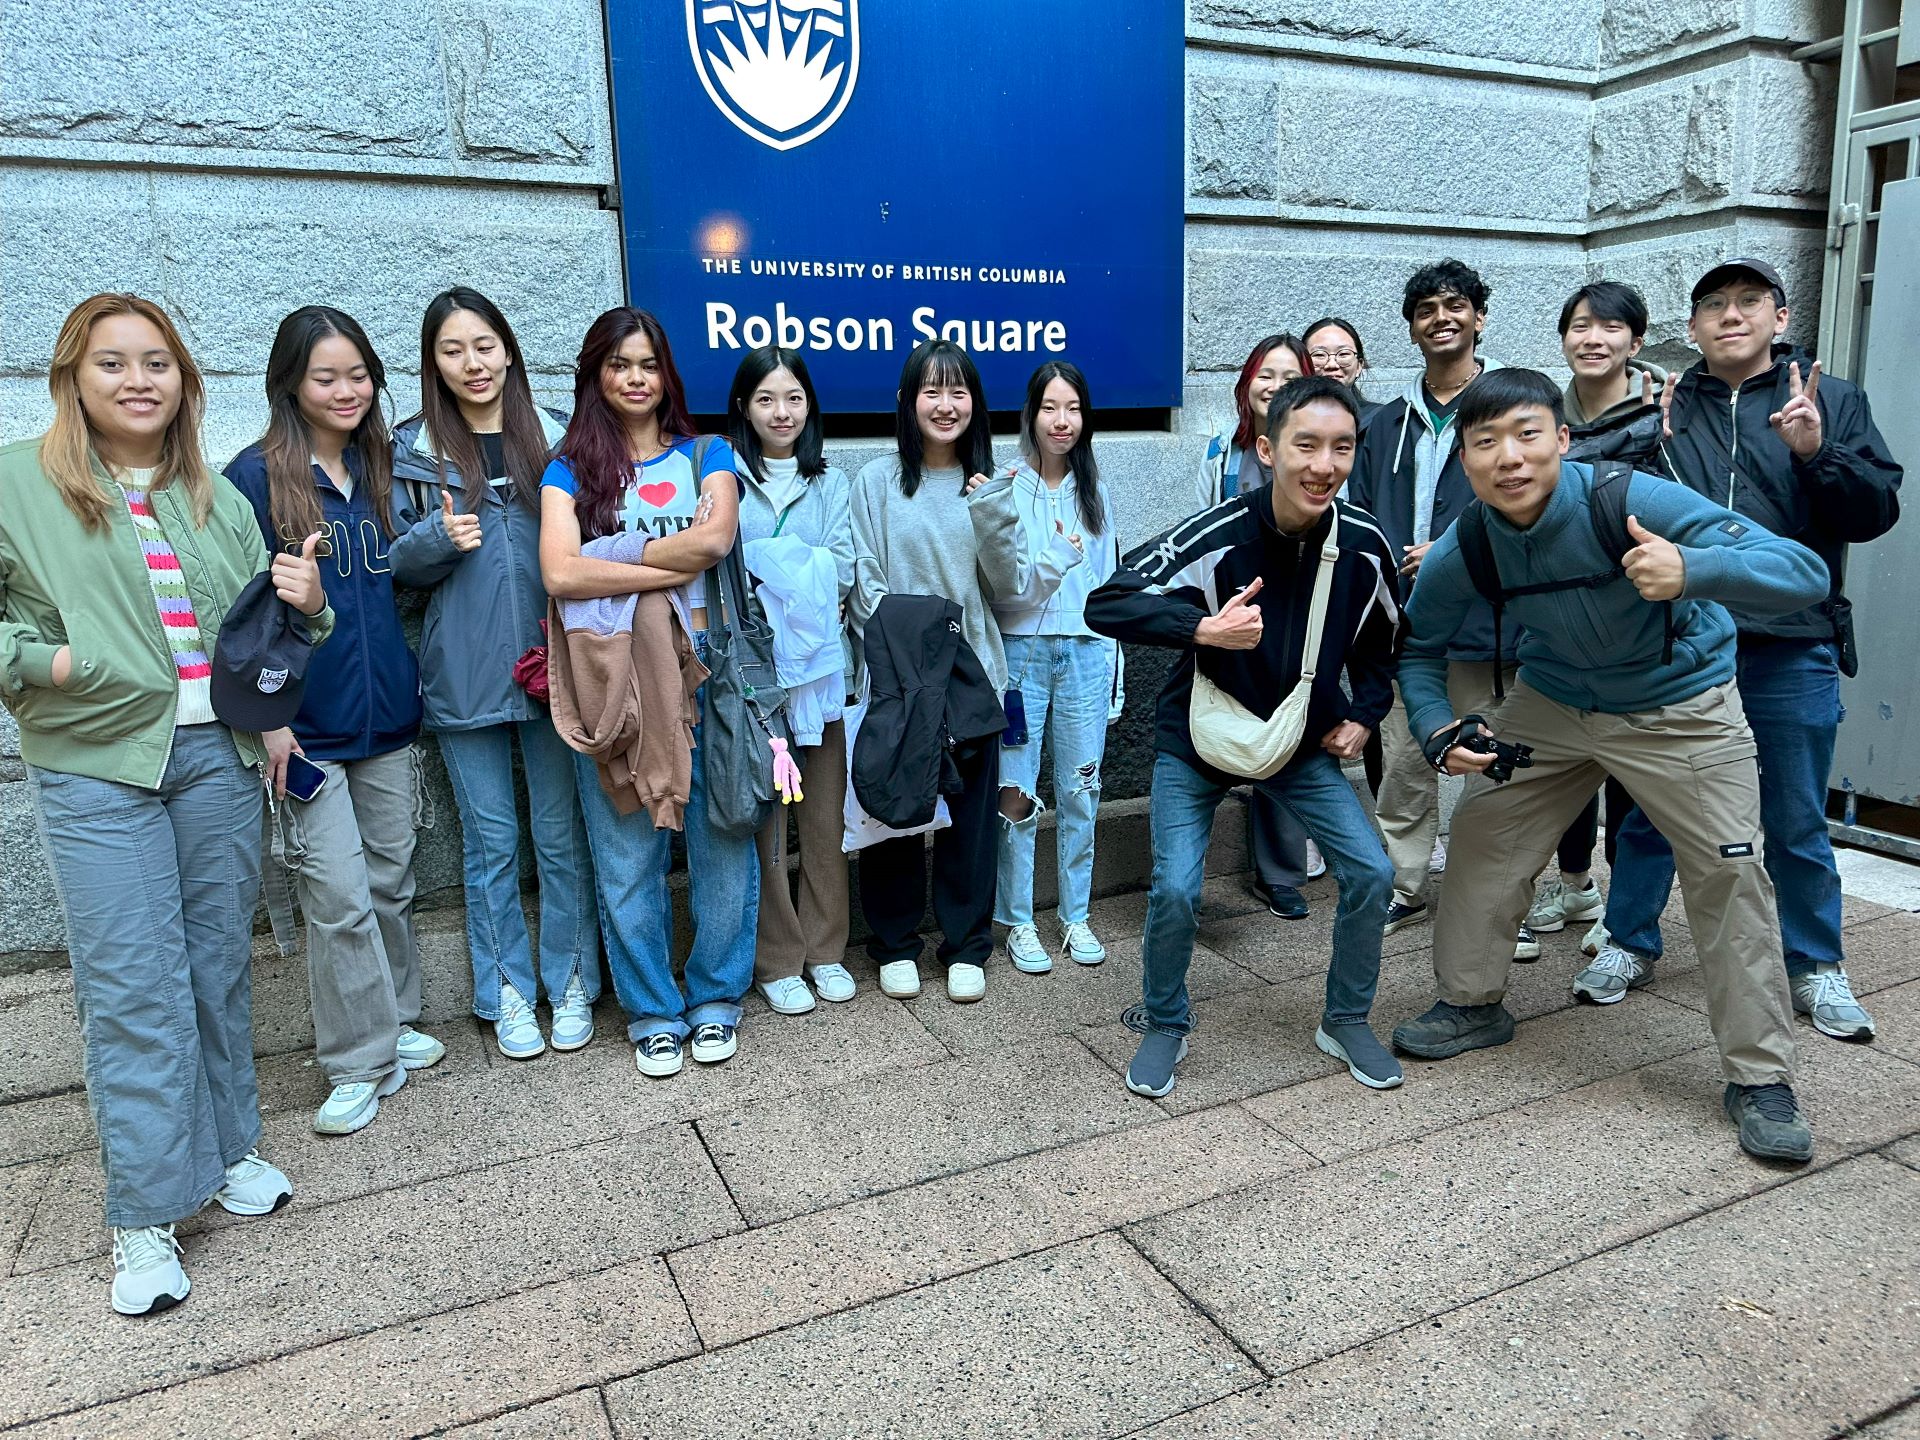 Students posing in front of Robson Square sign